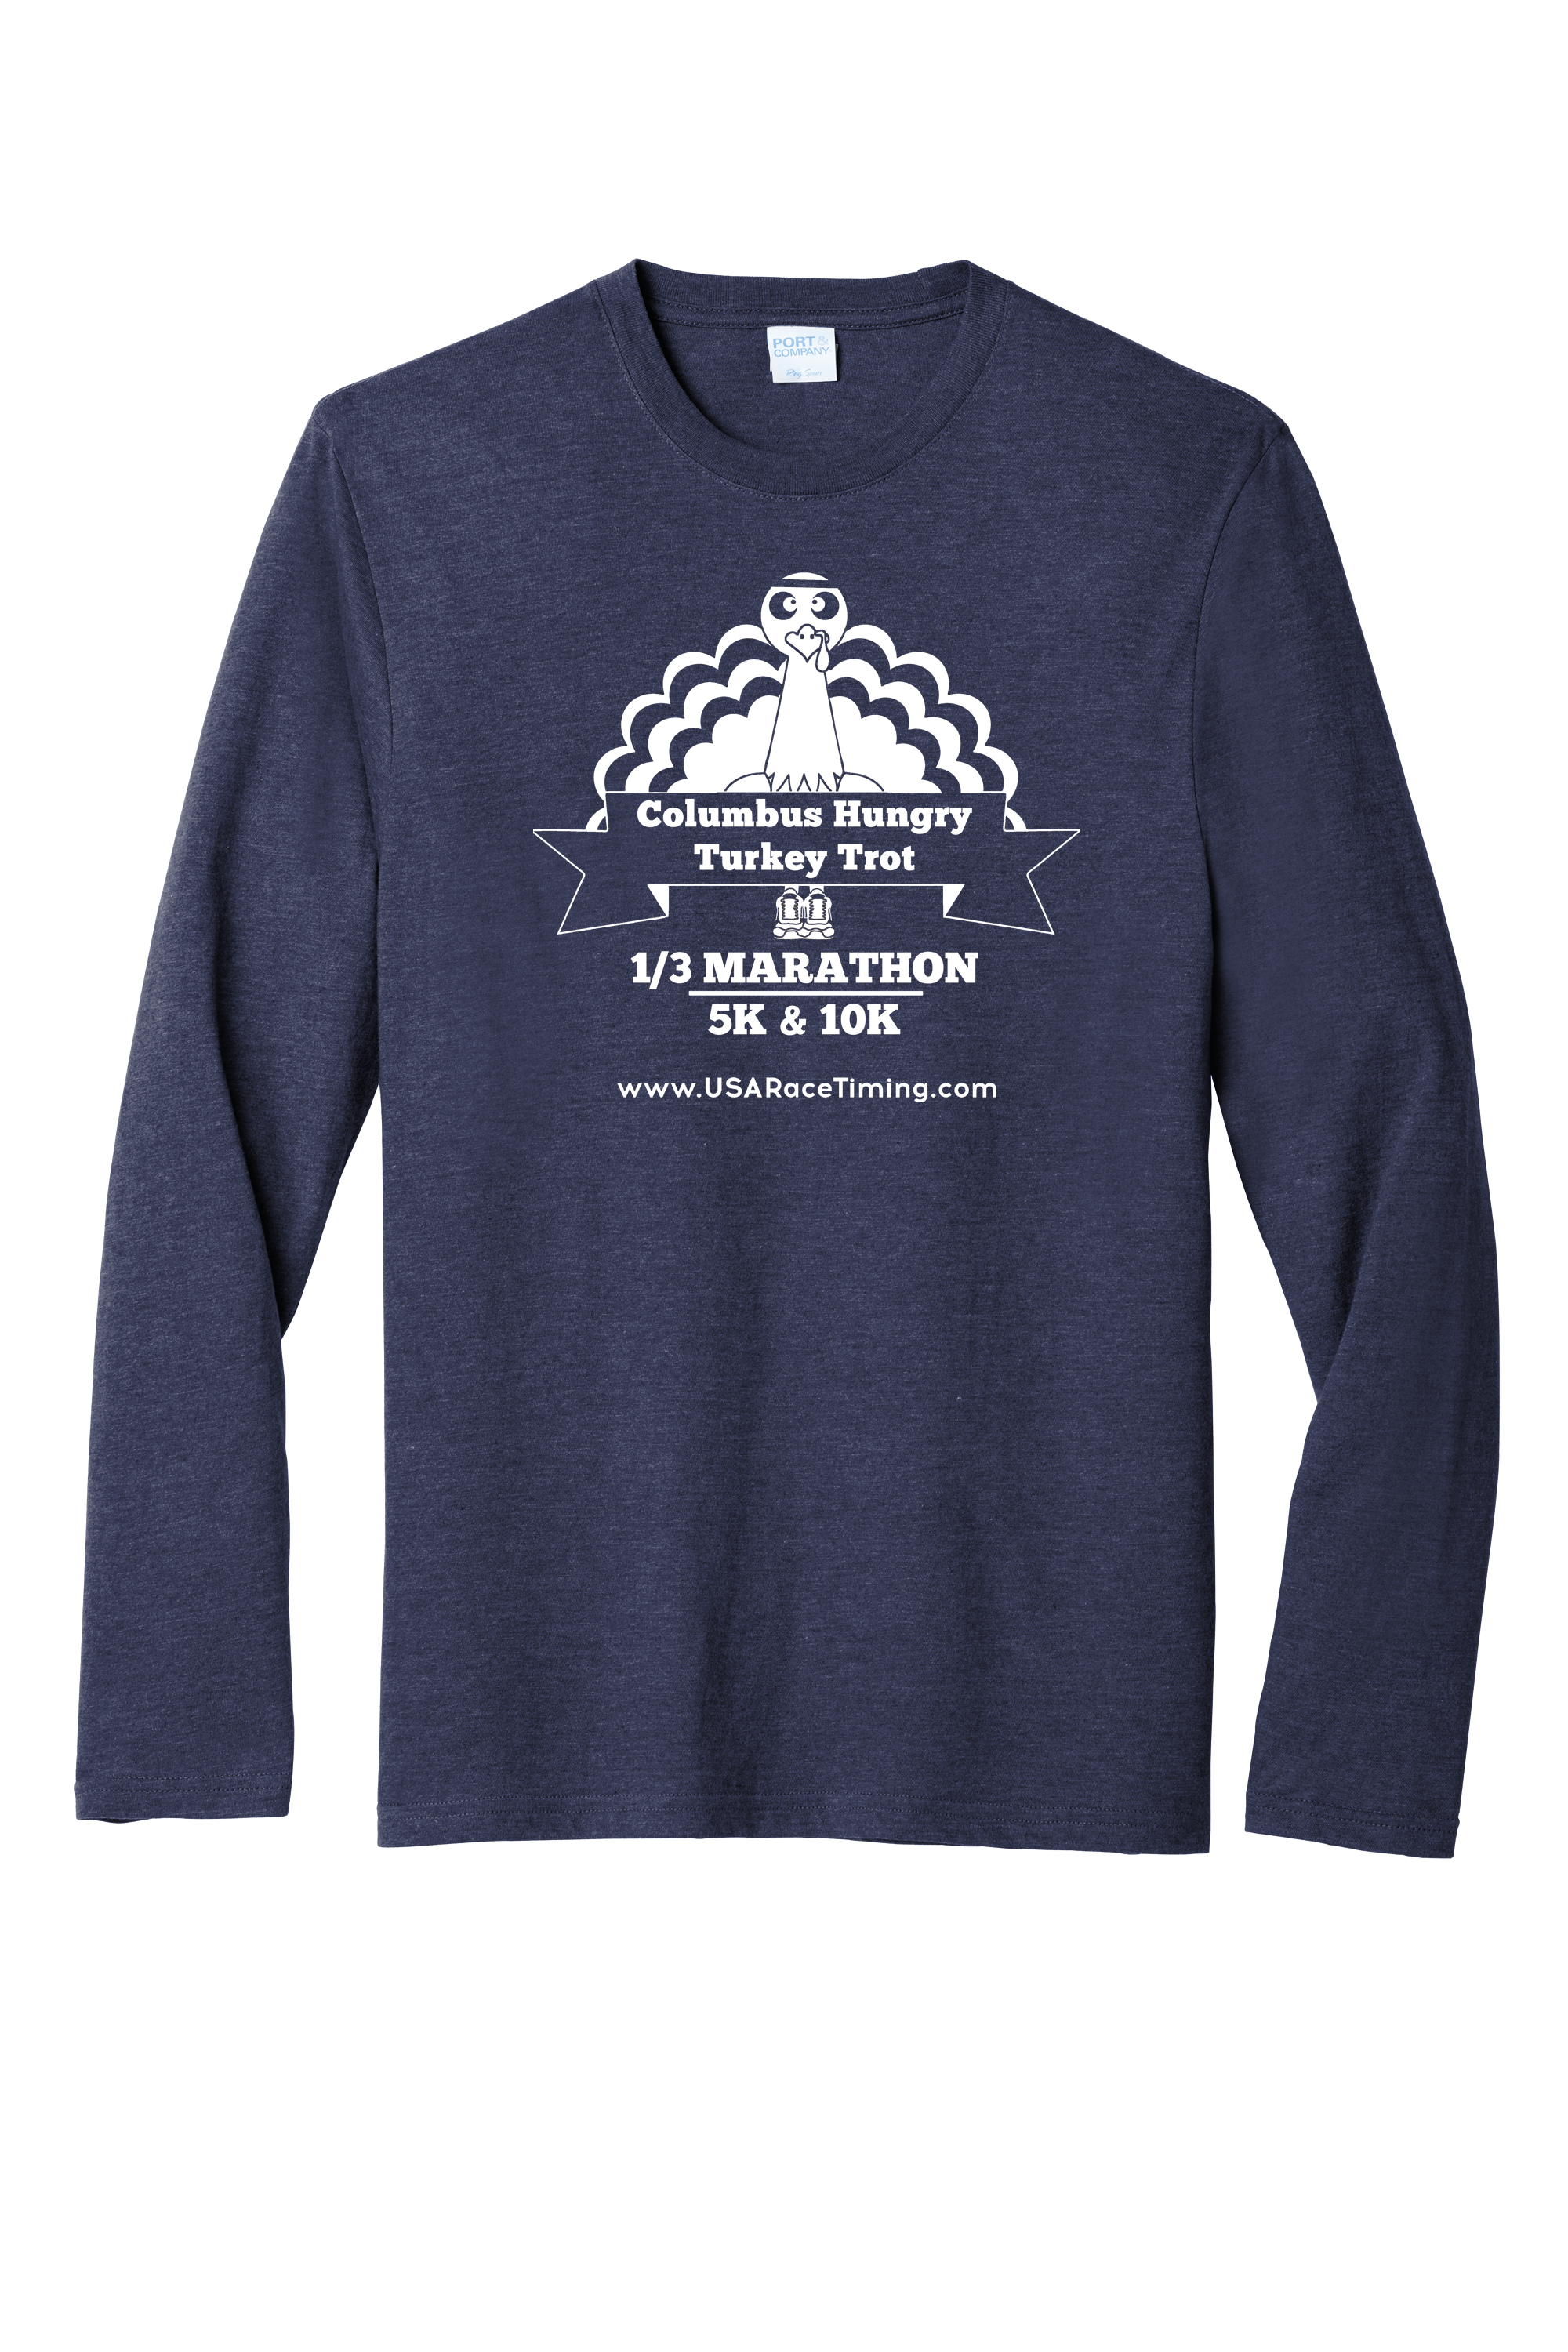 Columbus Ohio Hungry Turkey Trot Official Long Sleeve Shirt - Heather Navy With White Ink - Sport Tee Apparel Screen Printing - USA Race Timing & Event Management - Humane Society of Delaware County (HSDC) - Charity Race - 5k, 10k & 1/3 Marathon - Downtown Columbus, Ohio - Best Turkey Trot Swag In Ohio